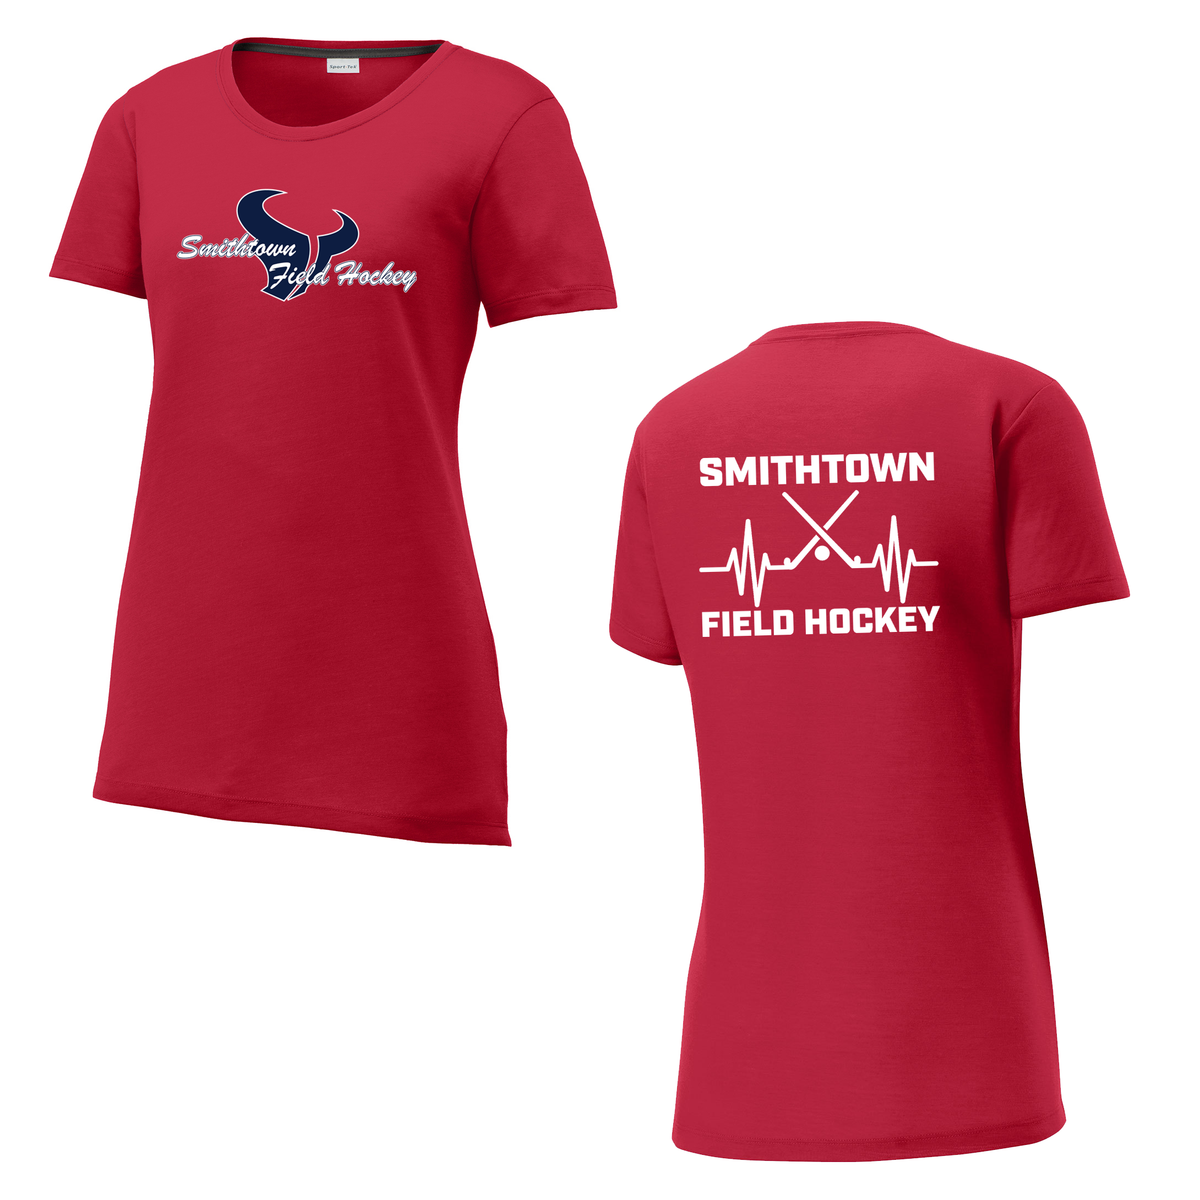 Smithtown Field Hockey Women's CottonTouch Performance T-Shirt (Front and Back Logo)